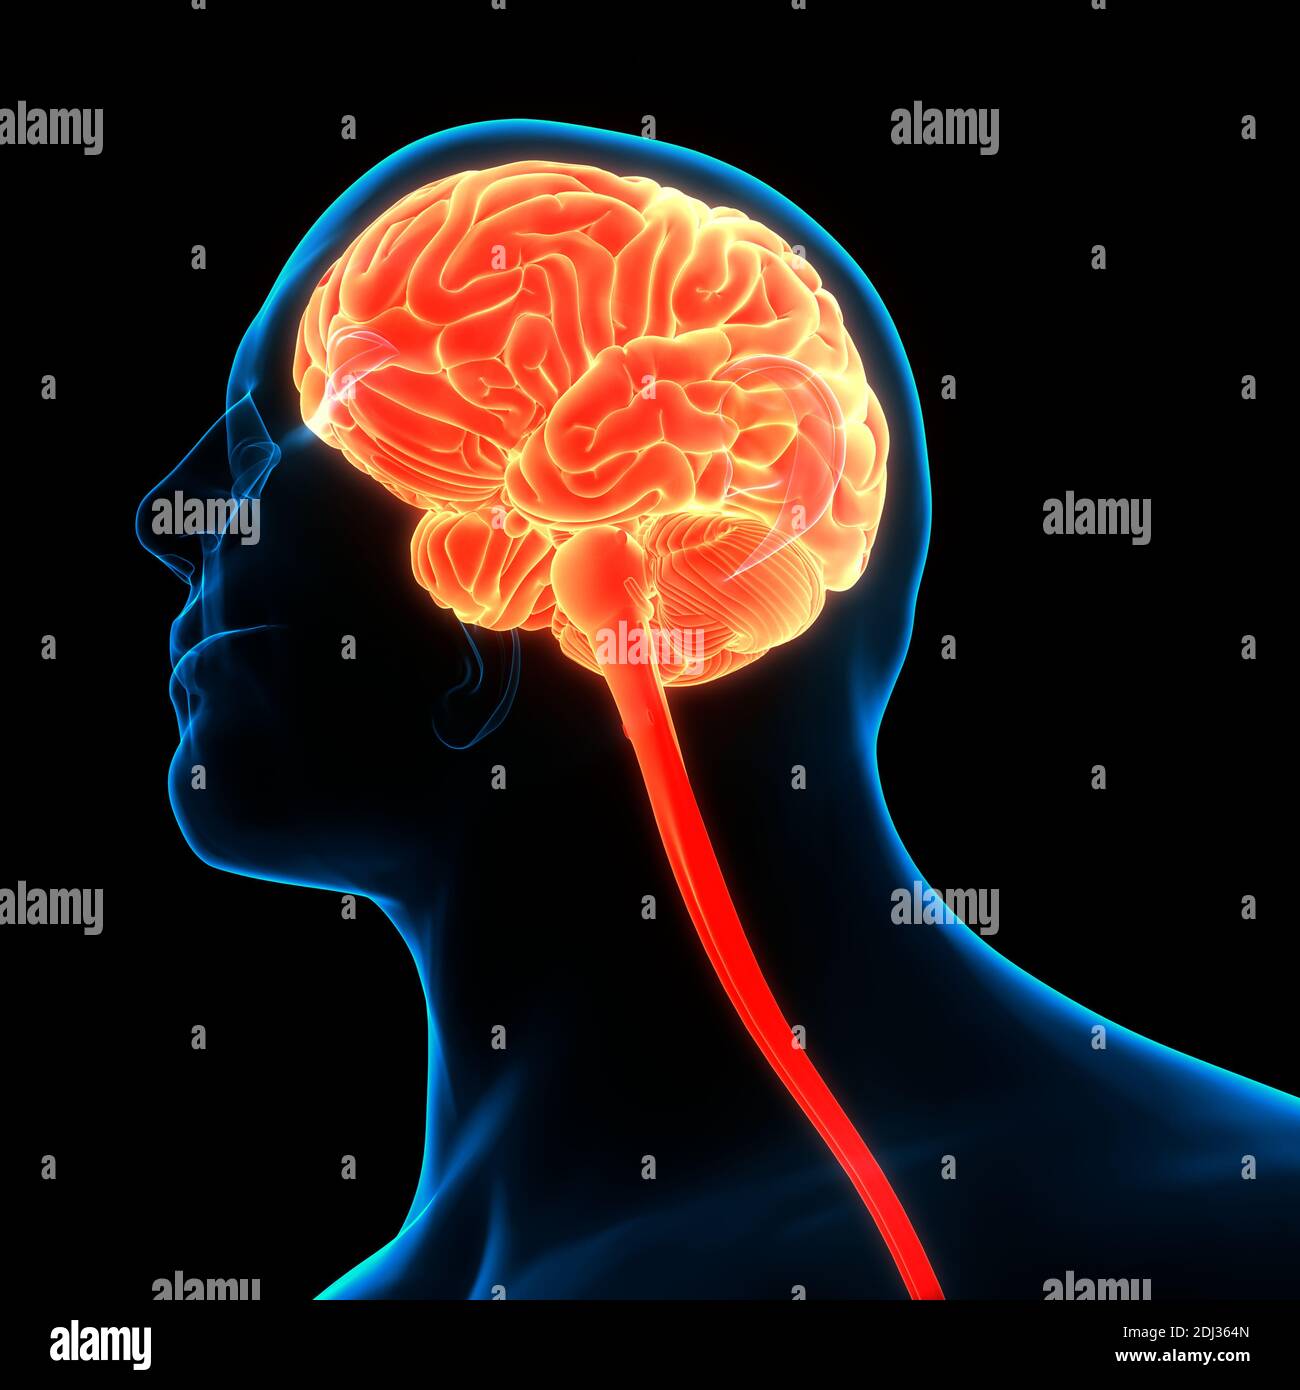 Parietal High Resolution Stock Photography and Images - Alamy